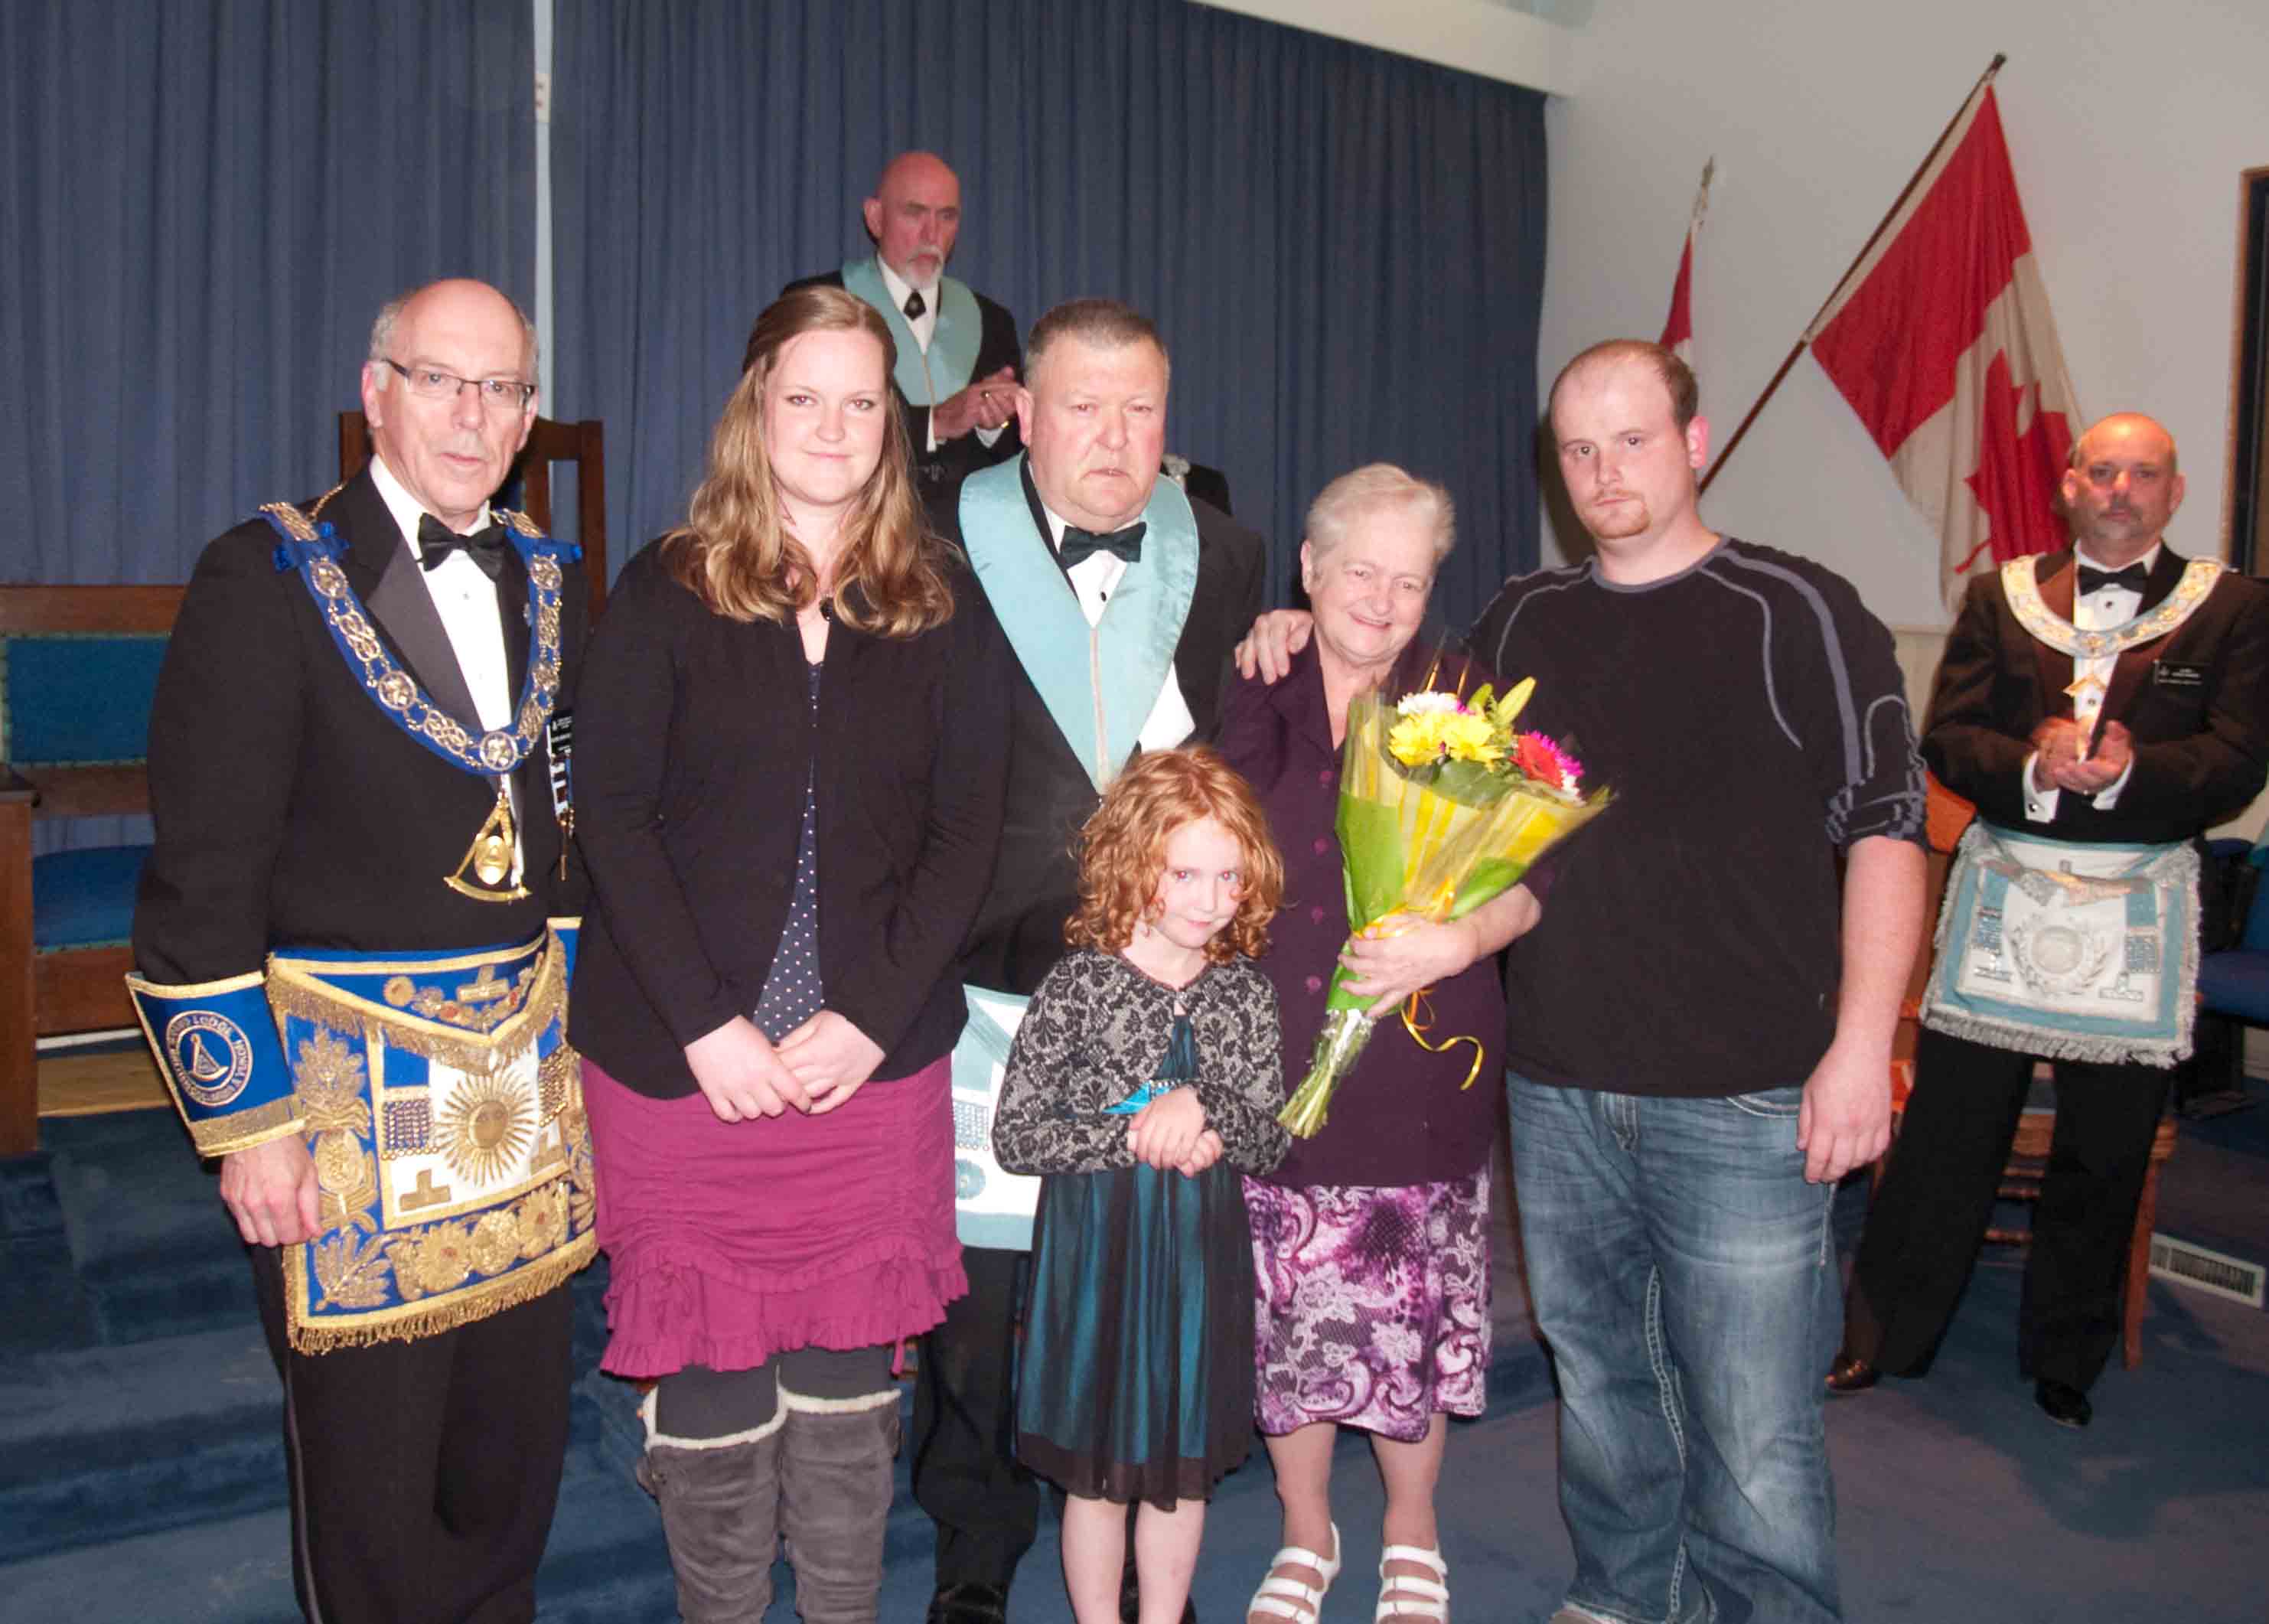 Stve McKenna and family with the Grand Master